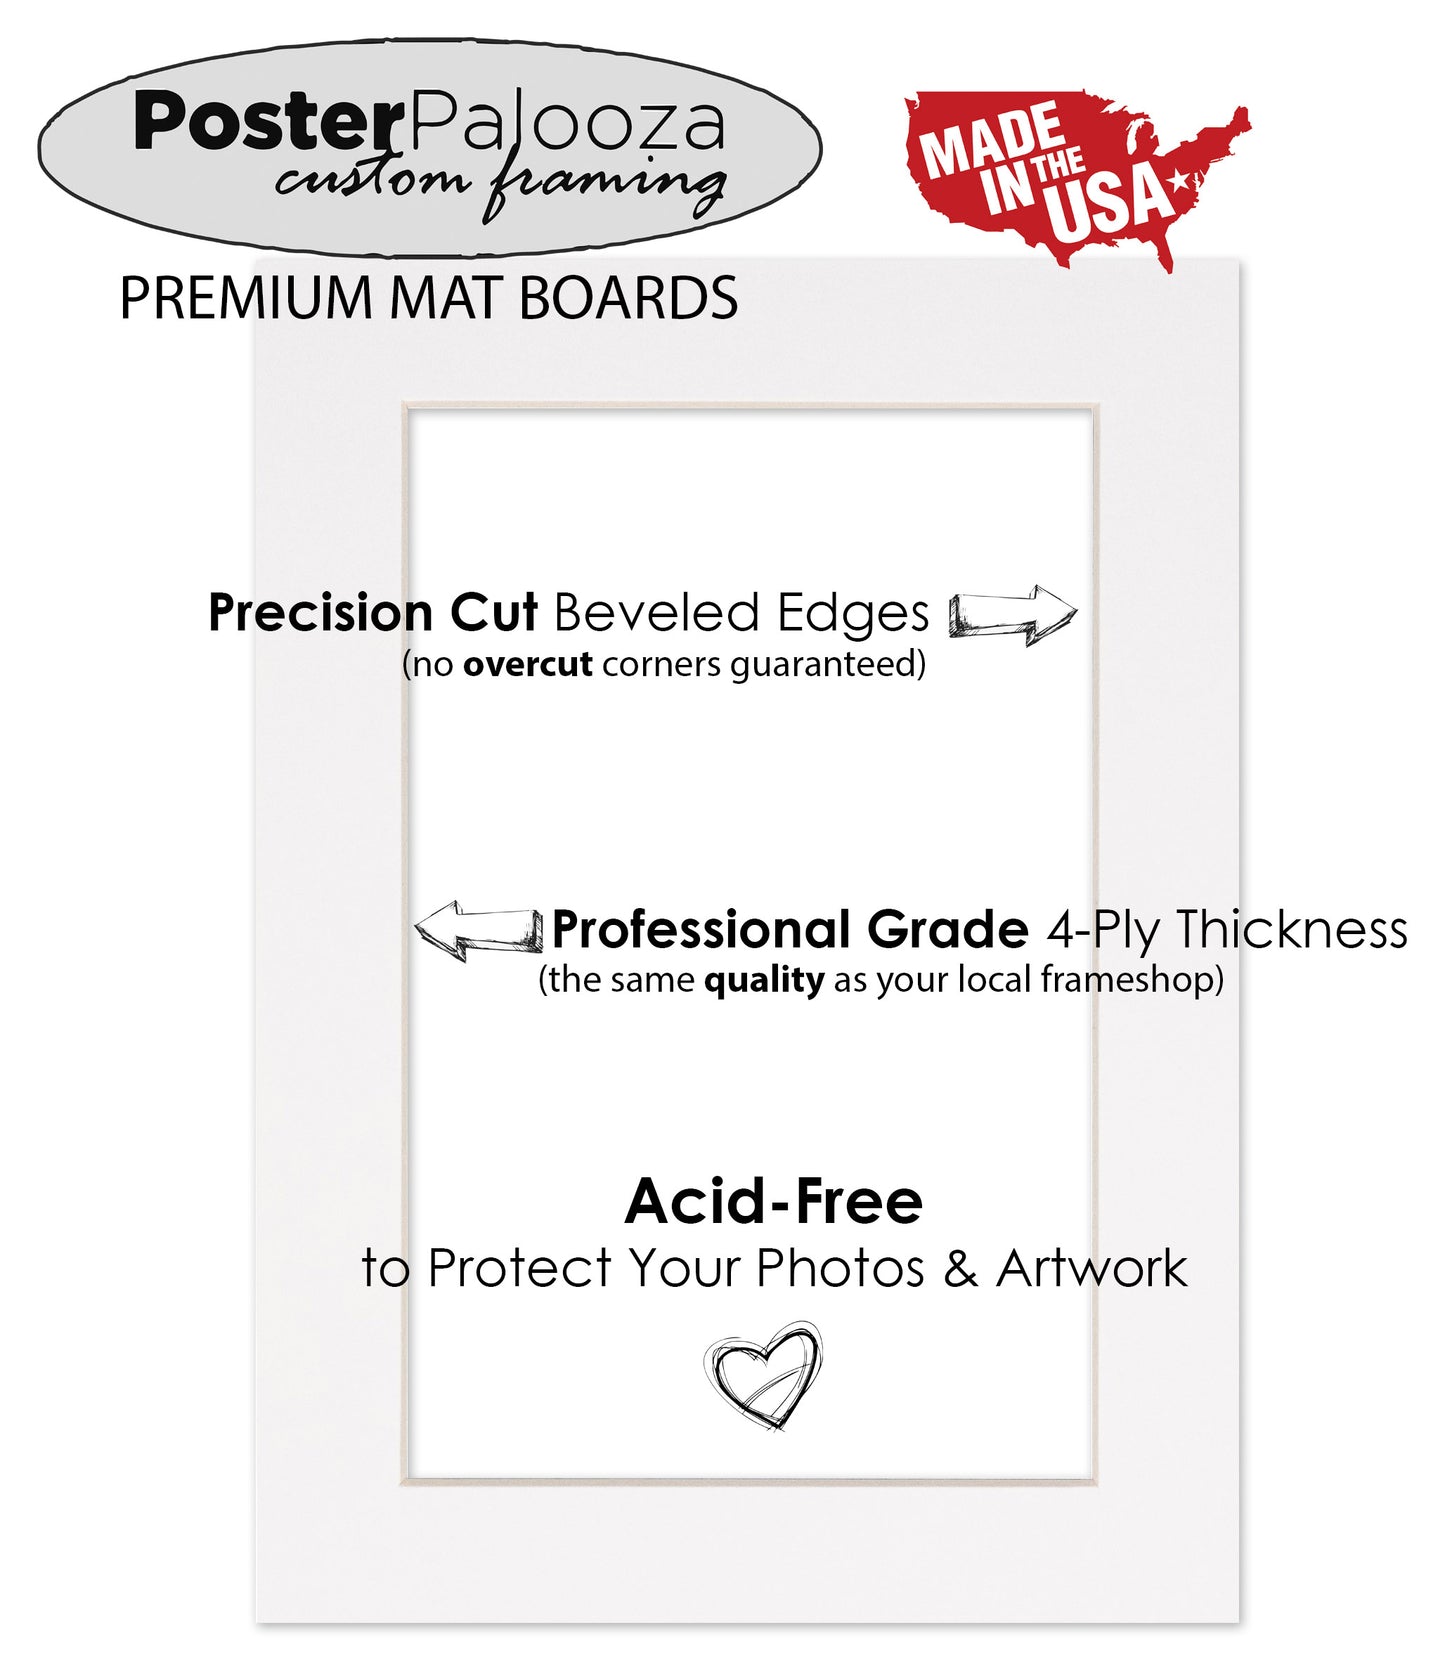 Pack of 25 Valley Green Precut Acid-Free Matboards